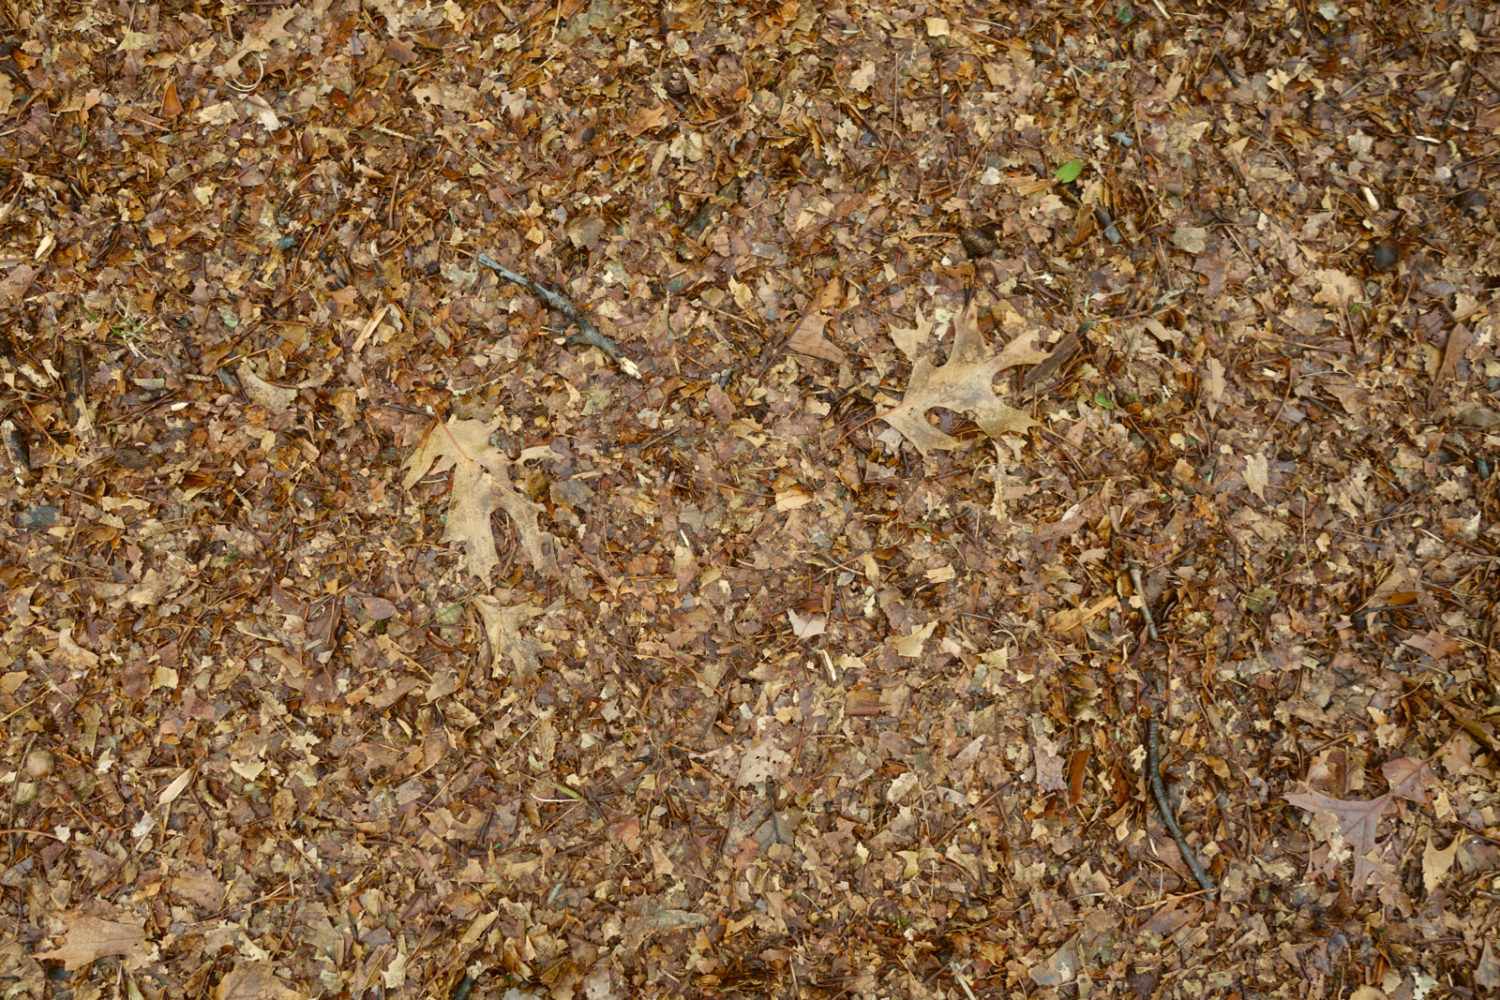 Mulched leaves in the back yard